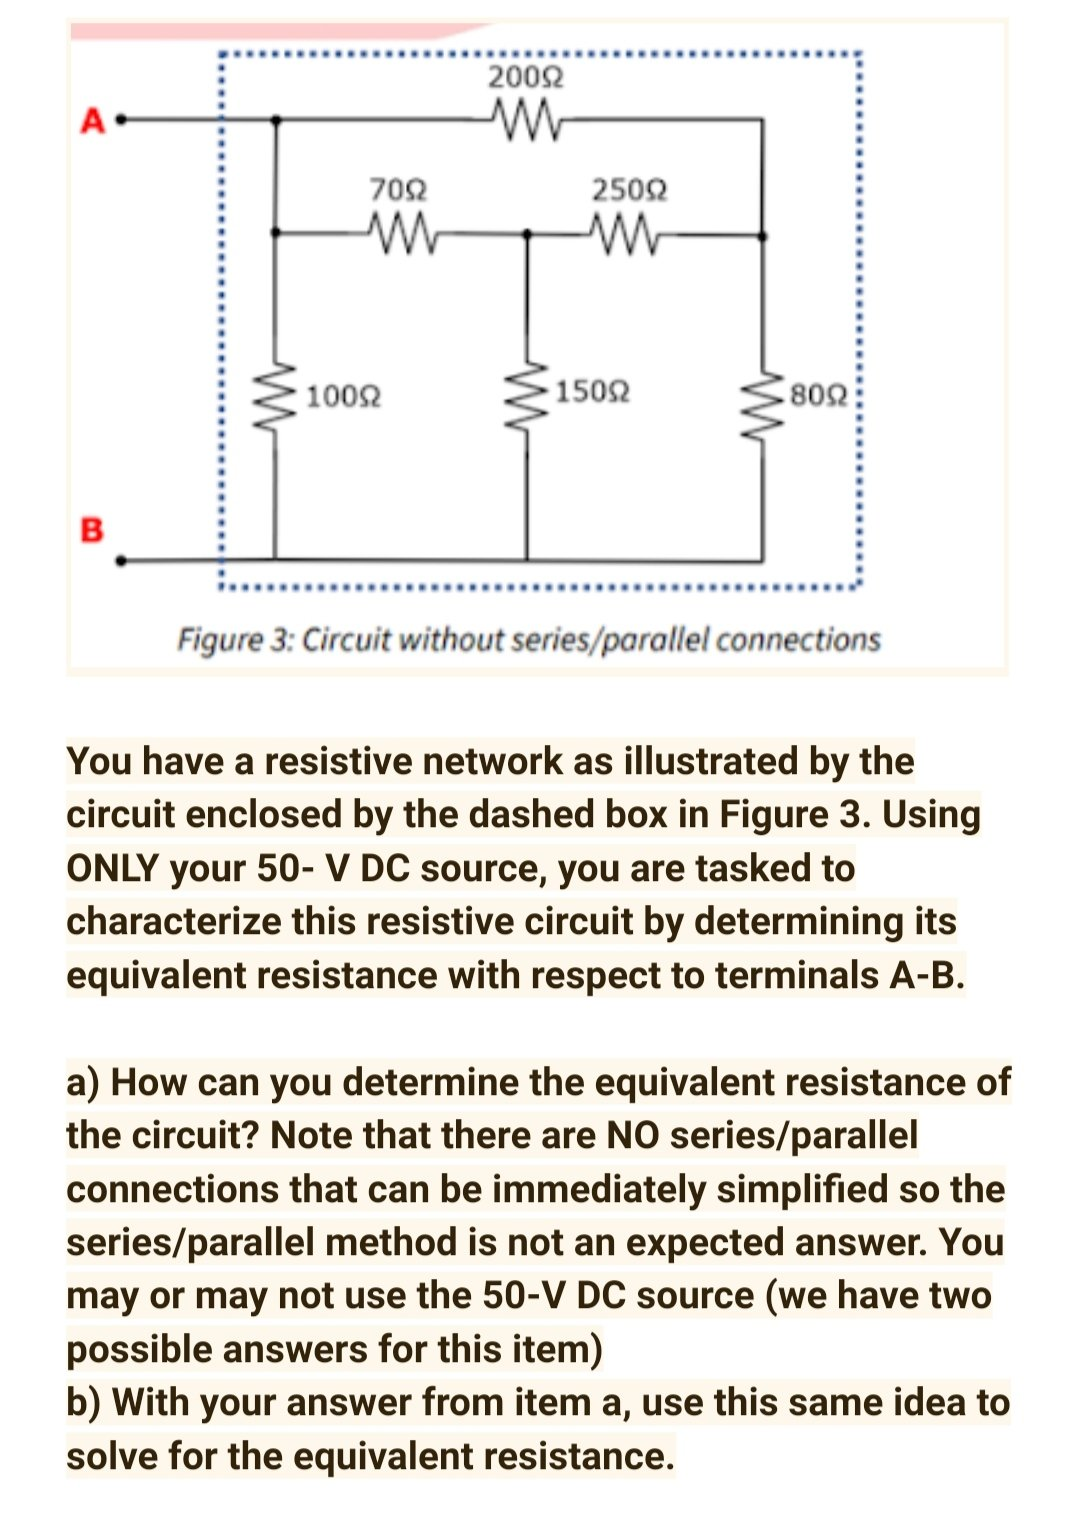 2002
A-
702
2502
1002
1502
B
......
Figure 3: Circuit without series/parallel connections
You have a resistive network as illustrated by the
circuit enclosed by the dashed box in Figure 3. Using
ONLY your 50- V DC source, you are tasked to
characterize this resistive circuit by determining its
equivalent resistance with respect to terminals A-B.
a) How can you determine the equivalent resistance of
the circuit? Note that there are NO series/parallel
connections that can be immediately simplified so the
series/parallel method is not an expected answer. You
may or may not use the 50-V DC source (we have two
possible answers for this item)
b) With your answer from item a, use this same idea to
solve for the equivalent resistance.
